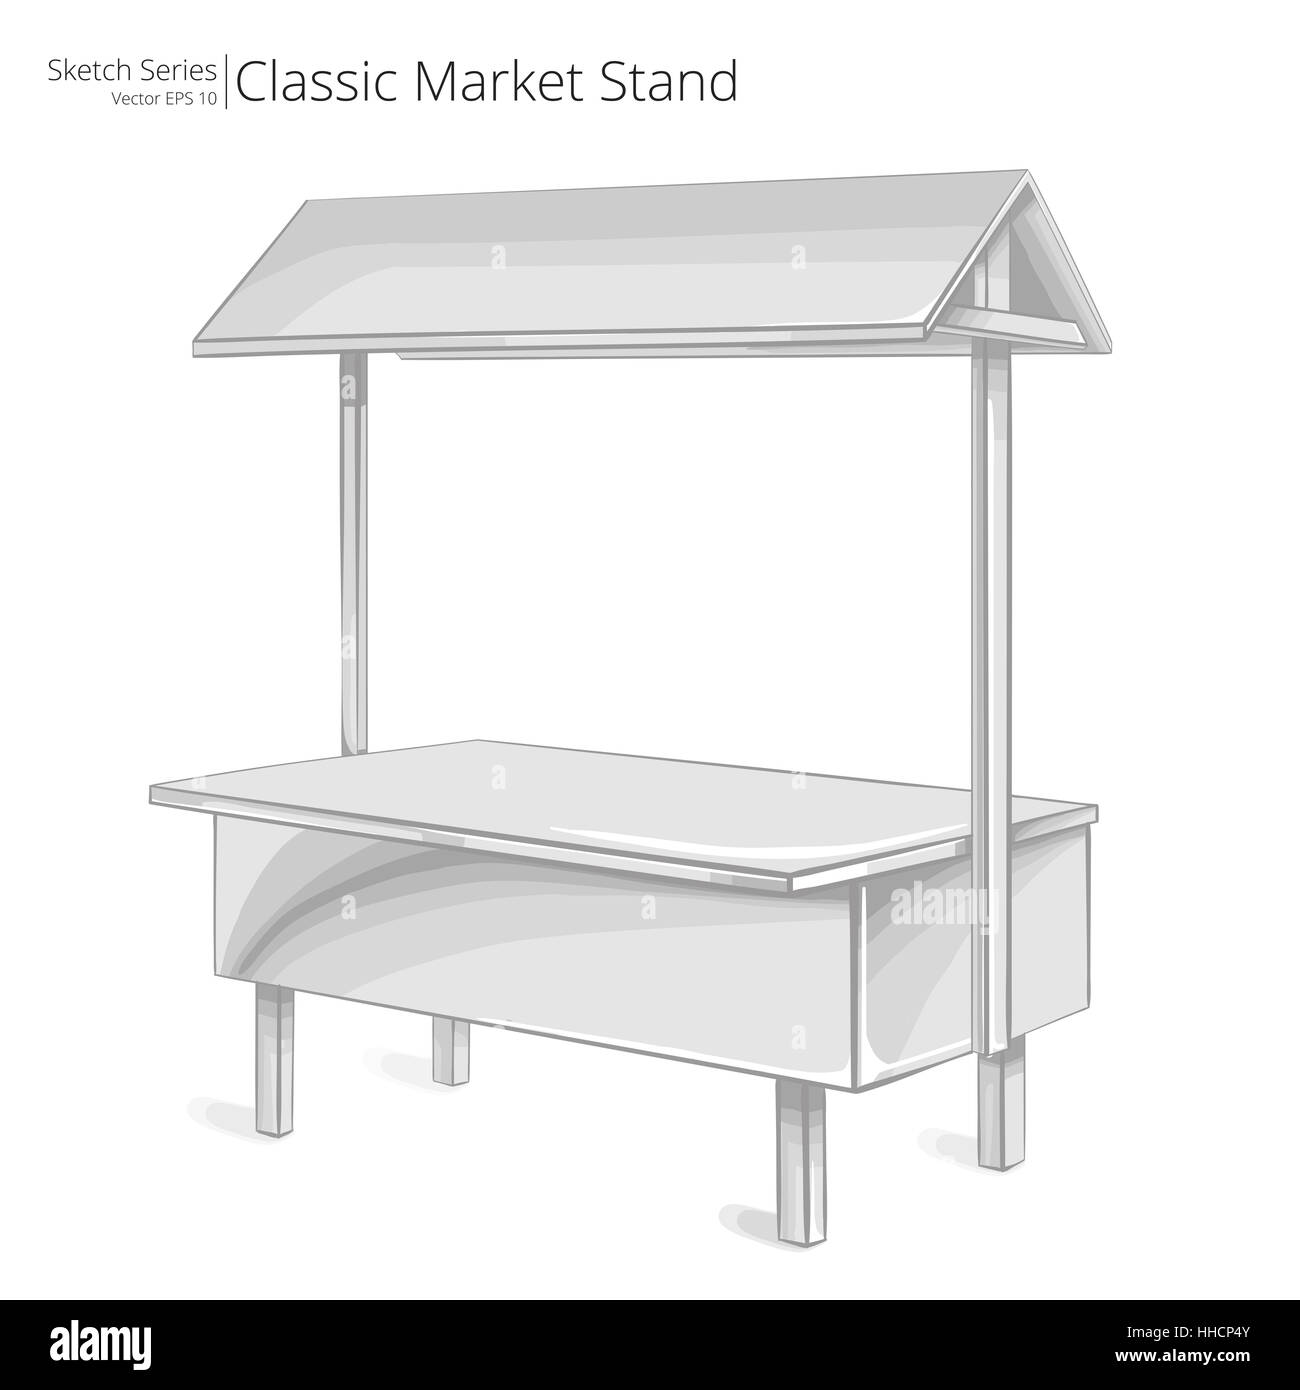 Vector, Illustration of a Market Stand. Sketch style. Sketch series. Stock Photo